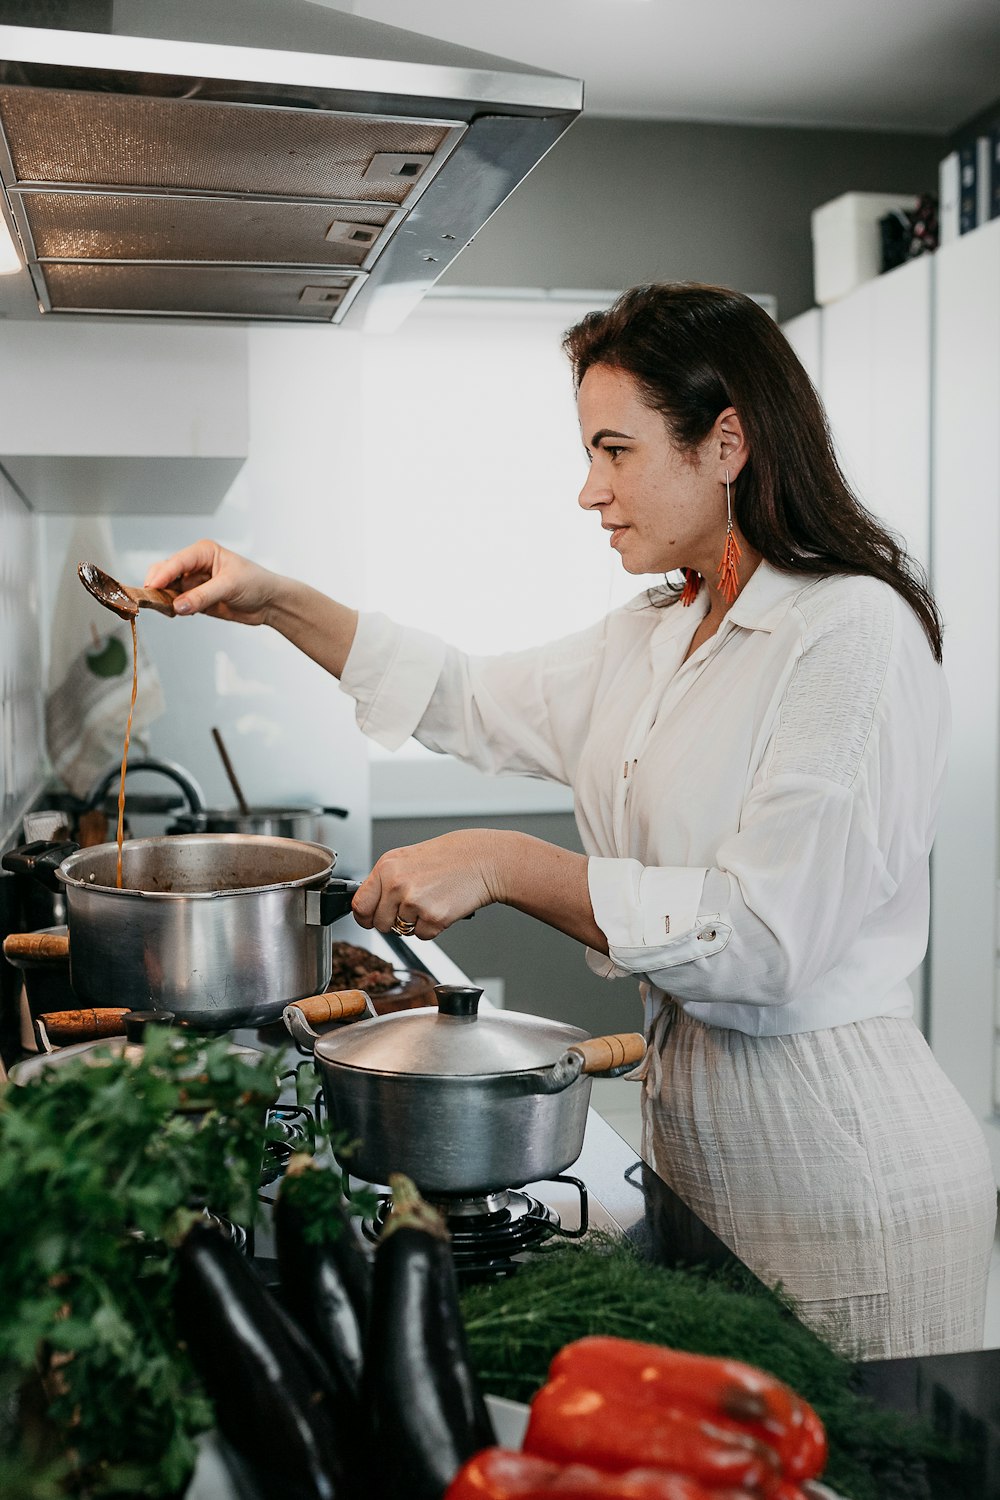 woman in white dress shirt holding stainless steel cooking pot